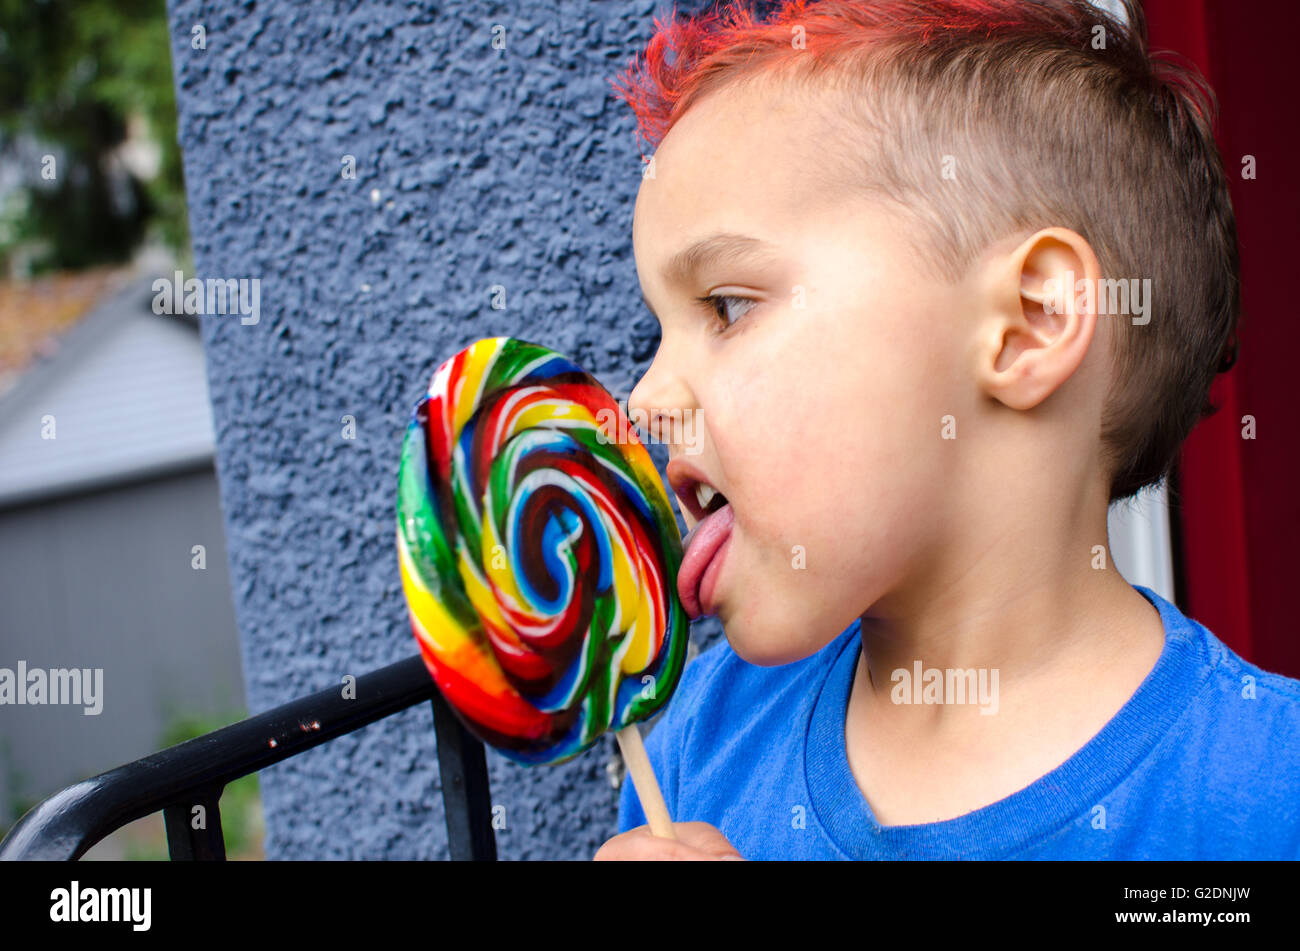 A young boy with an orange mohawk eats a large lollipop Stock Photo